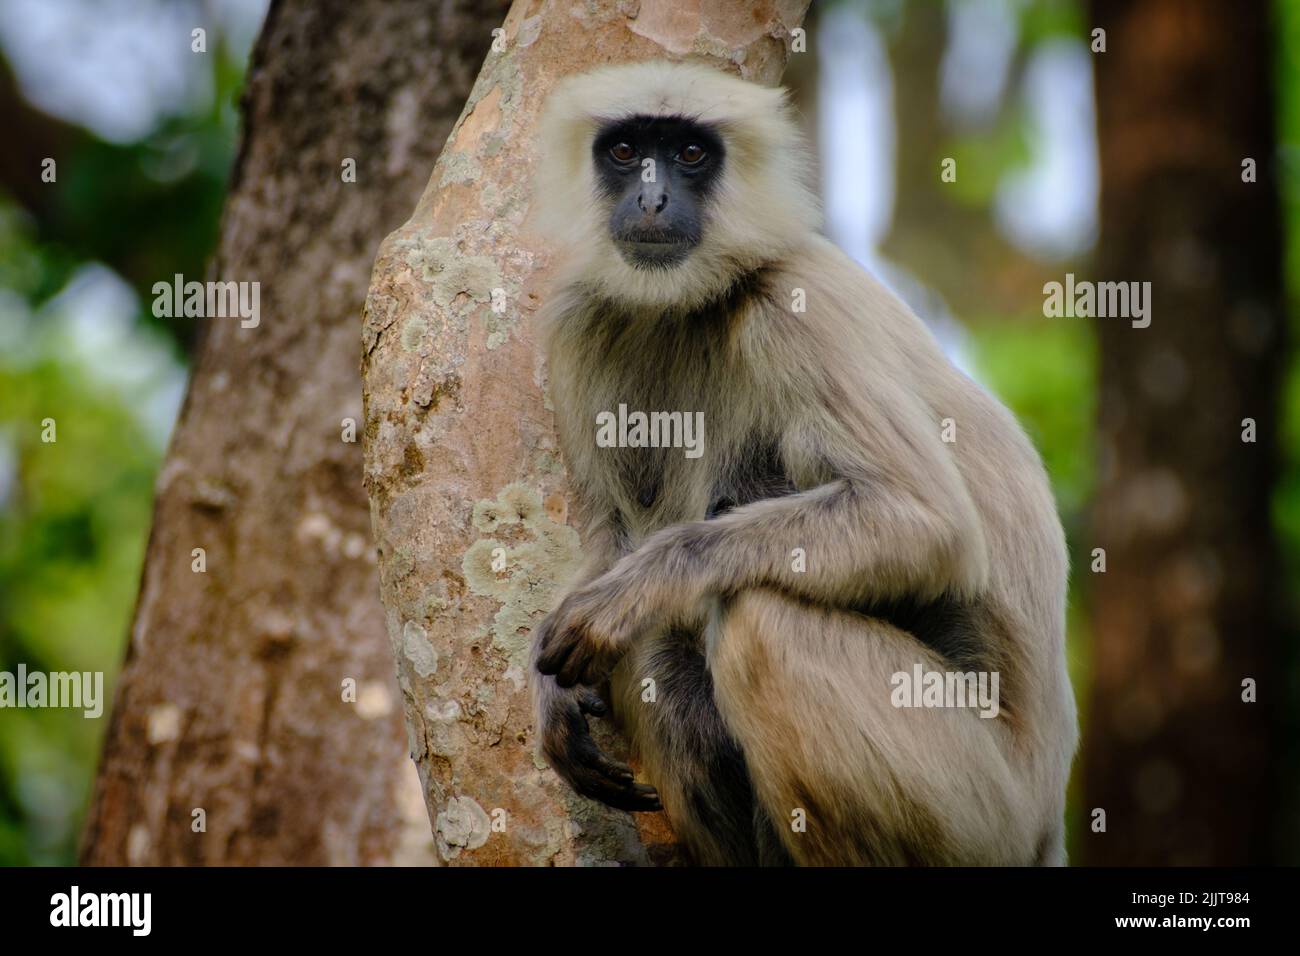 A gray langur monkey in a tree in Chitwan National Park, Nepal Stock Photo